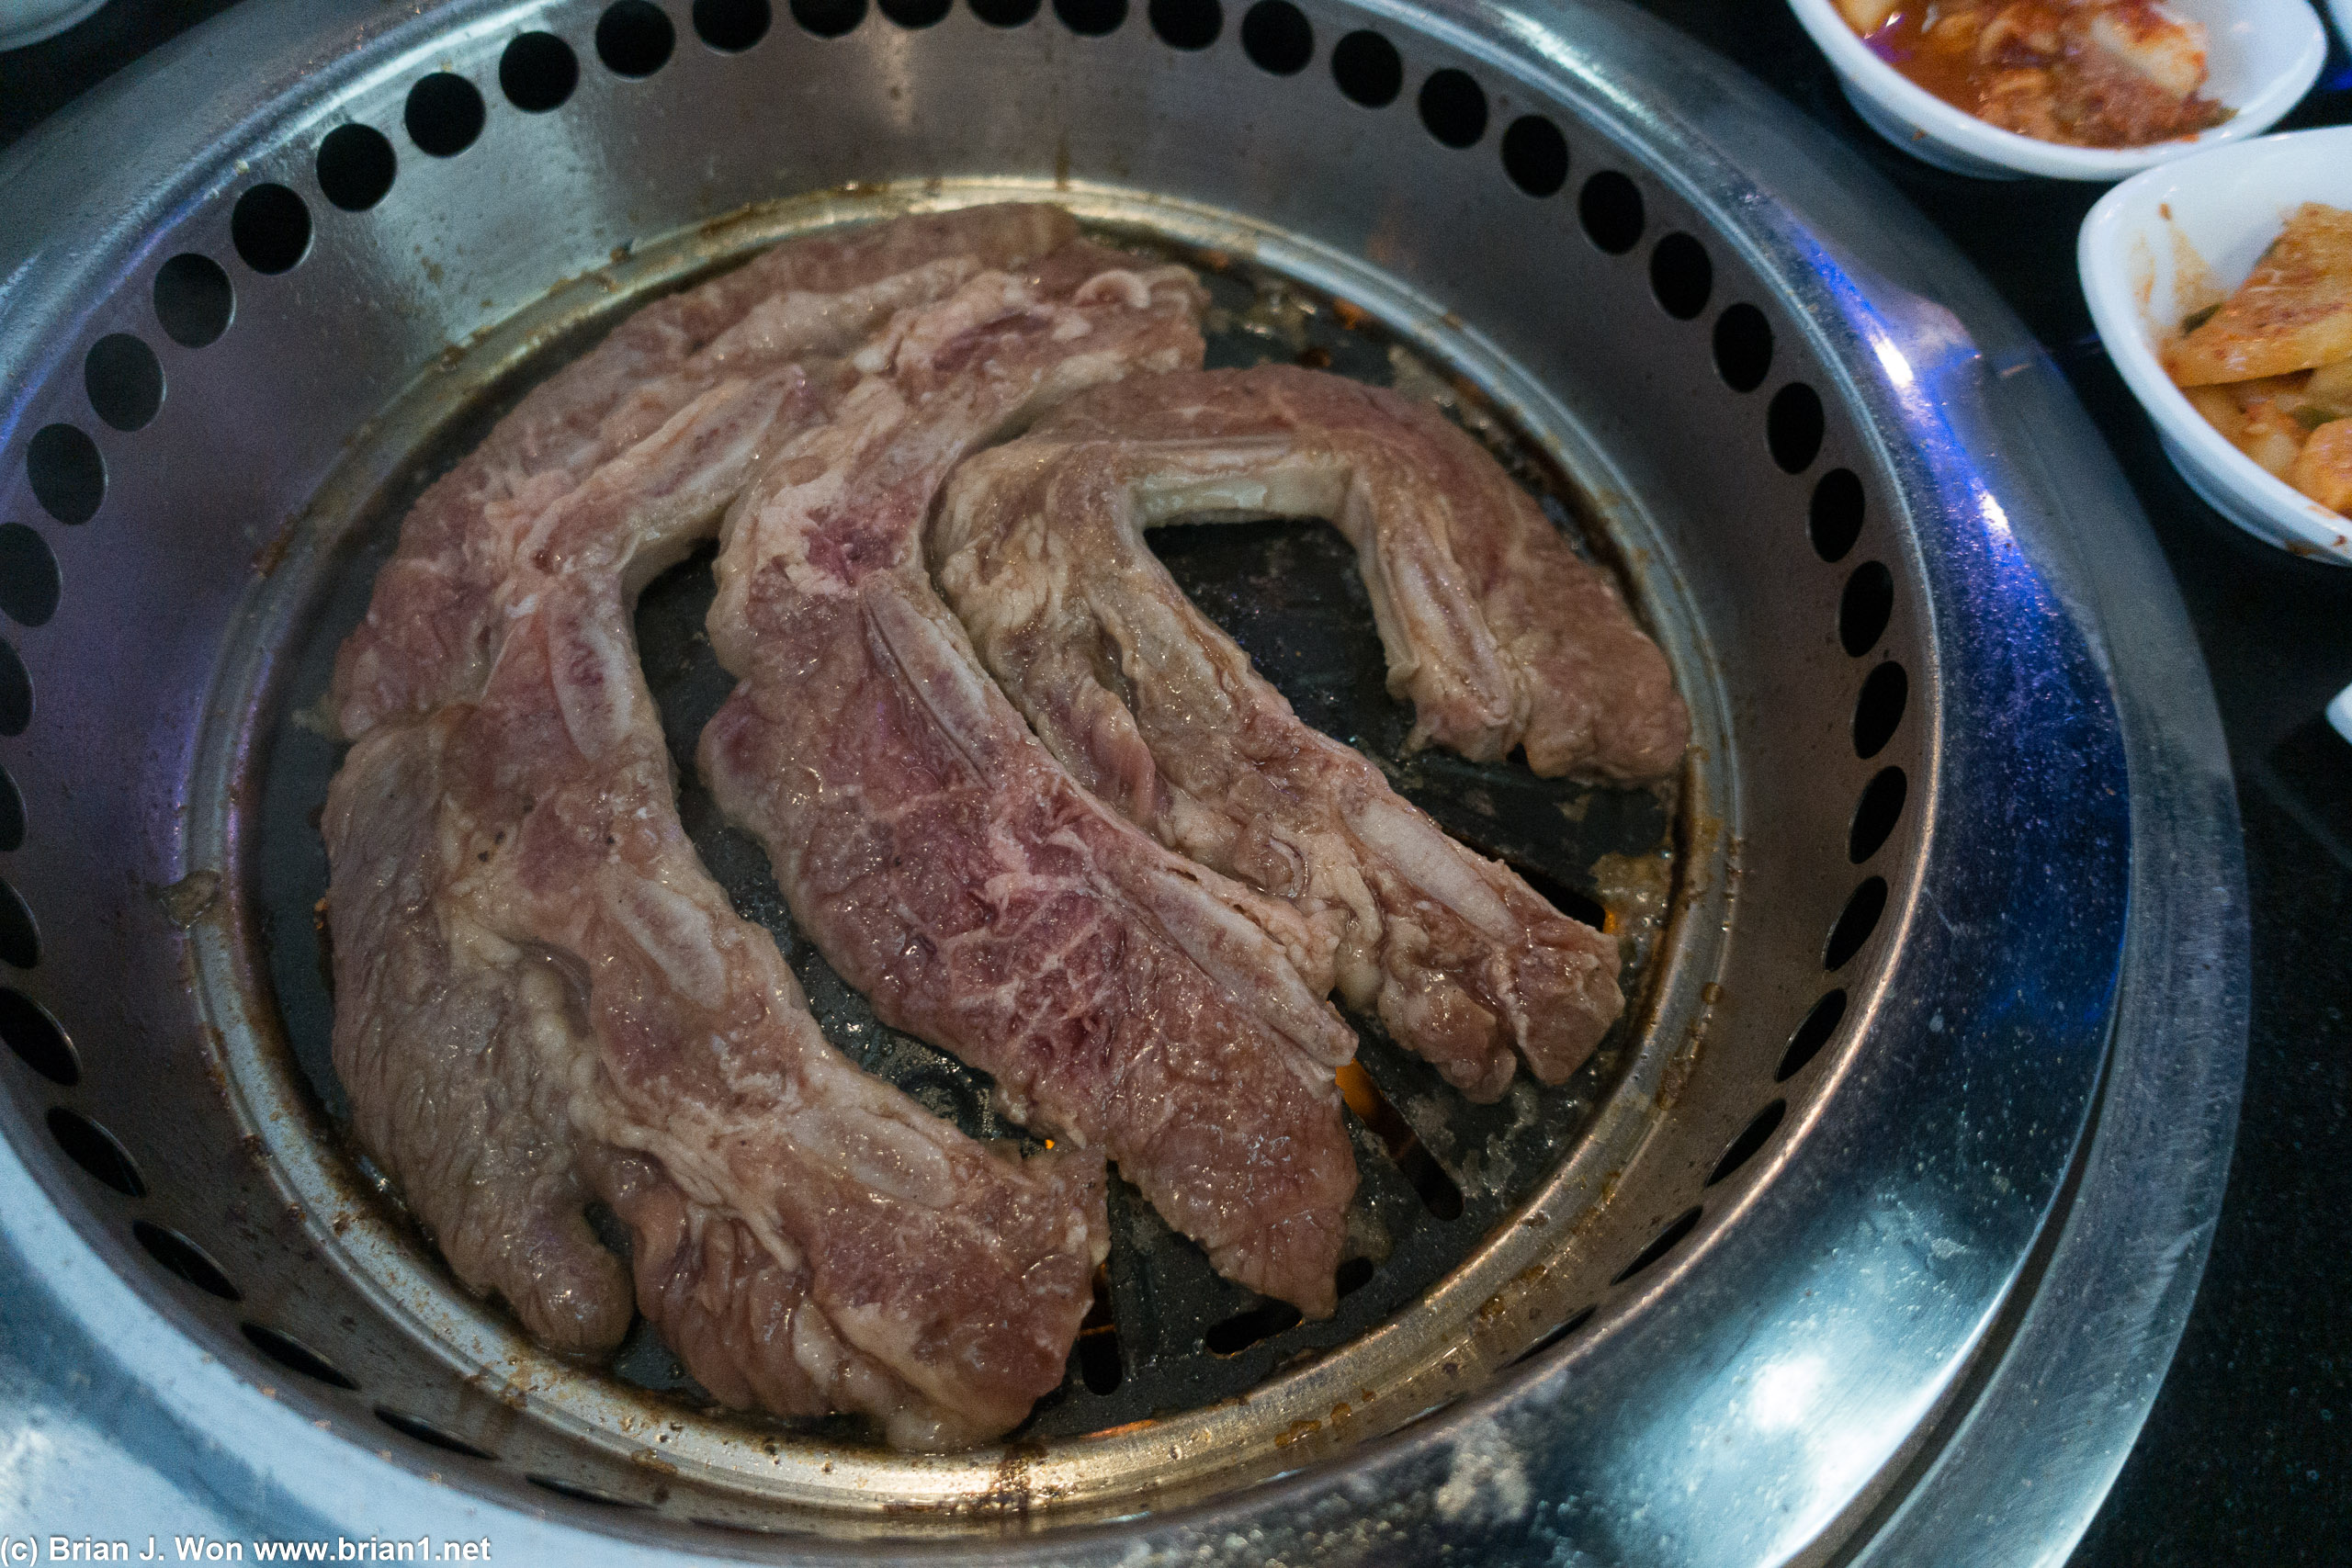 Galbi. Quality was just so-so.